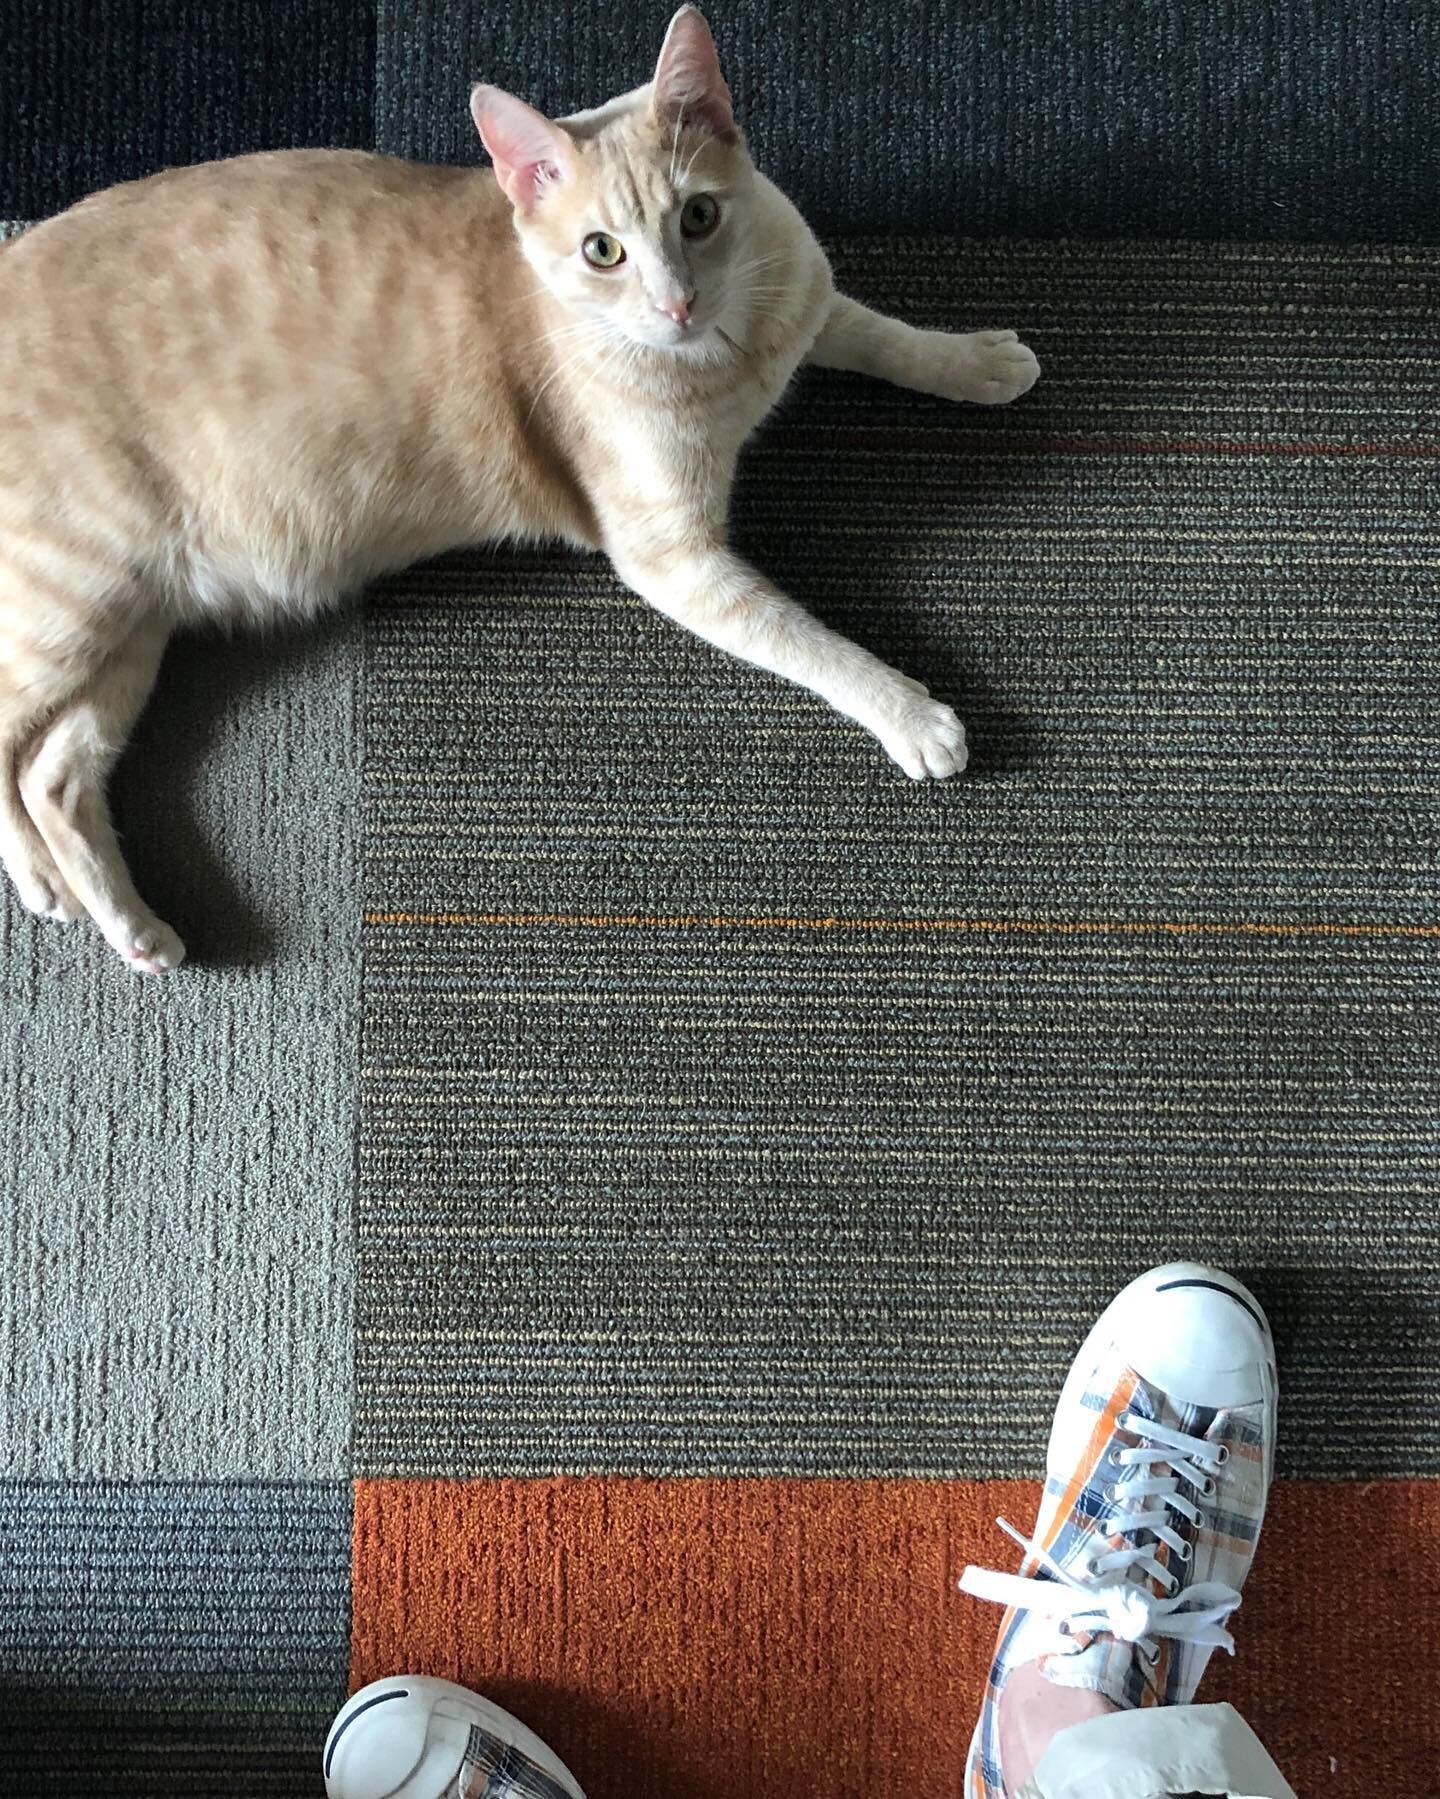 Looking down at feet. 4/29/2020.
The details make me happy. Often I pause and my mind wonders...just how I&rsquo;m wired. So I have been told.  My favorite @converse madras Jack Purcell sneakers, my Oliver,  the little blonde ginger in my life, or a 